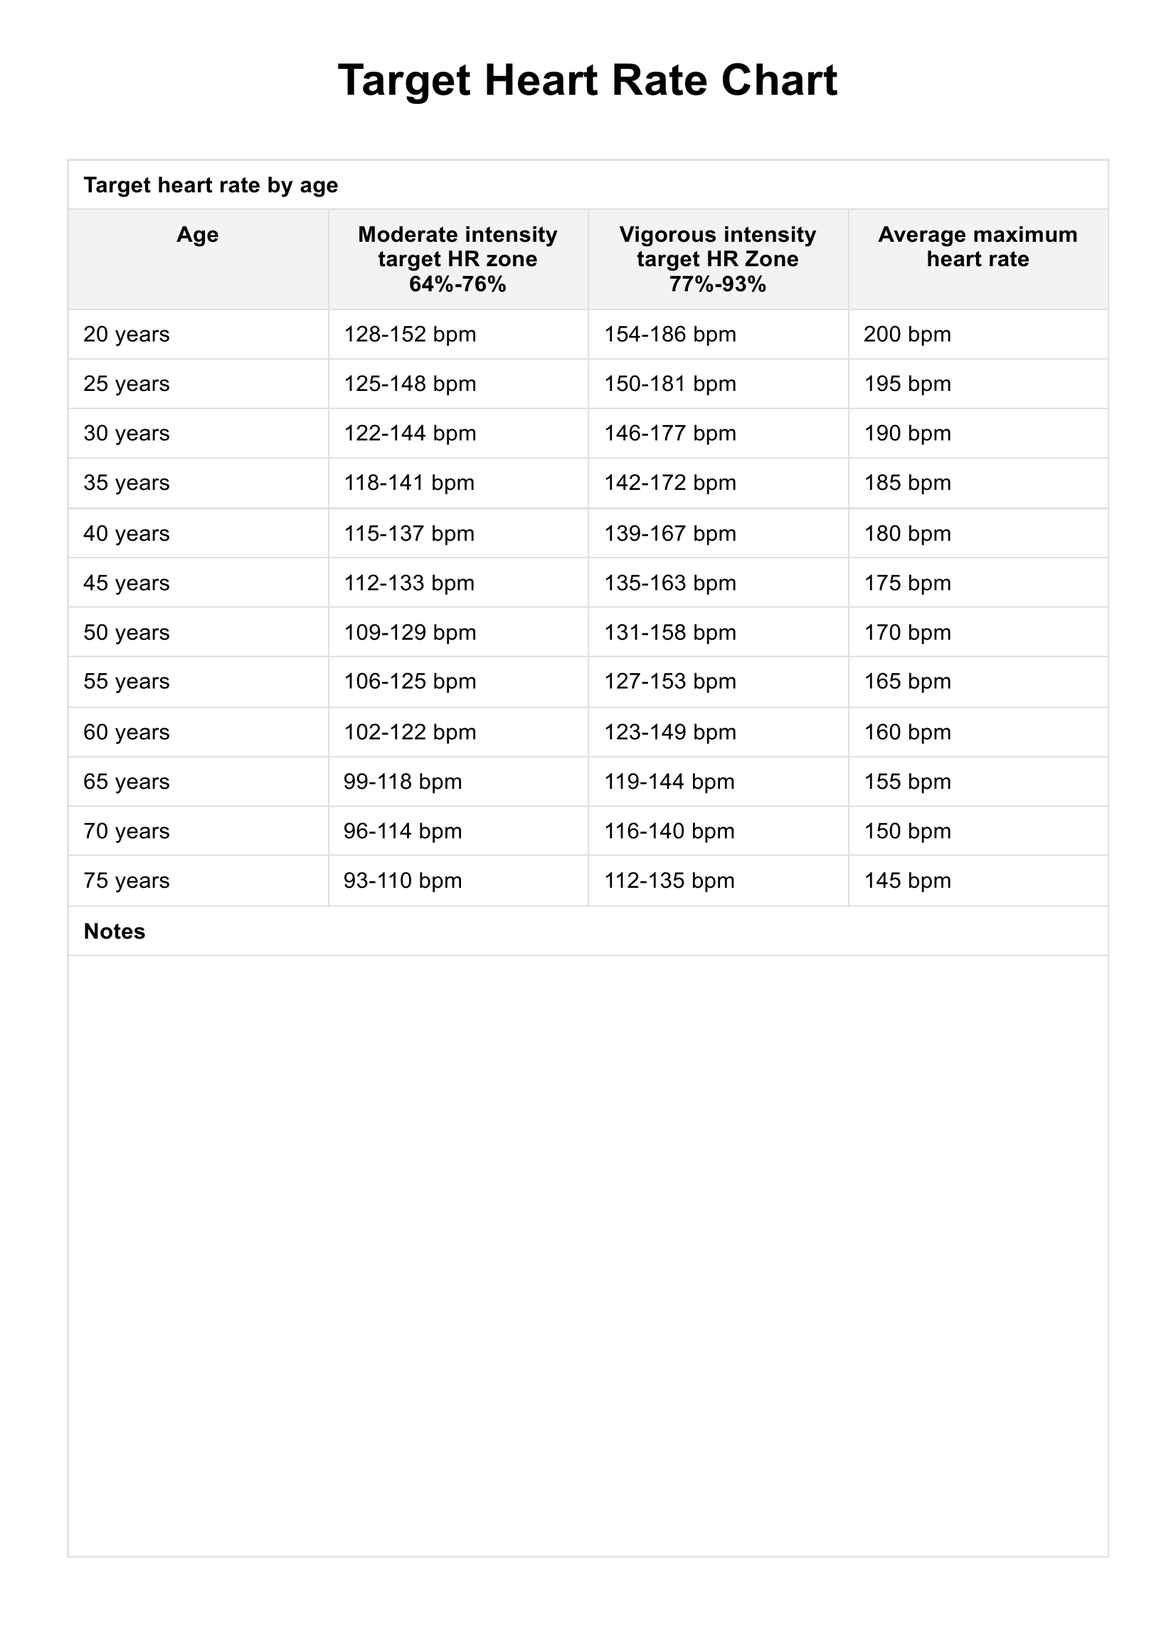 Target Heart Rate PDF Example